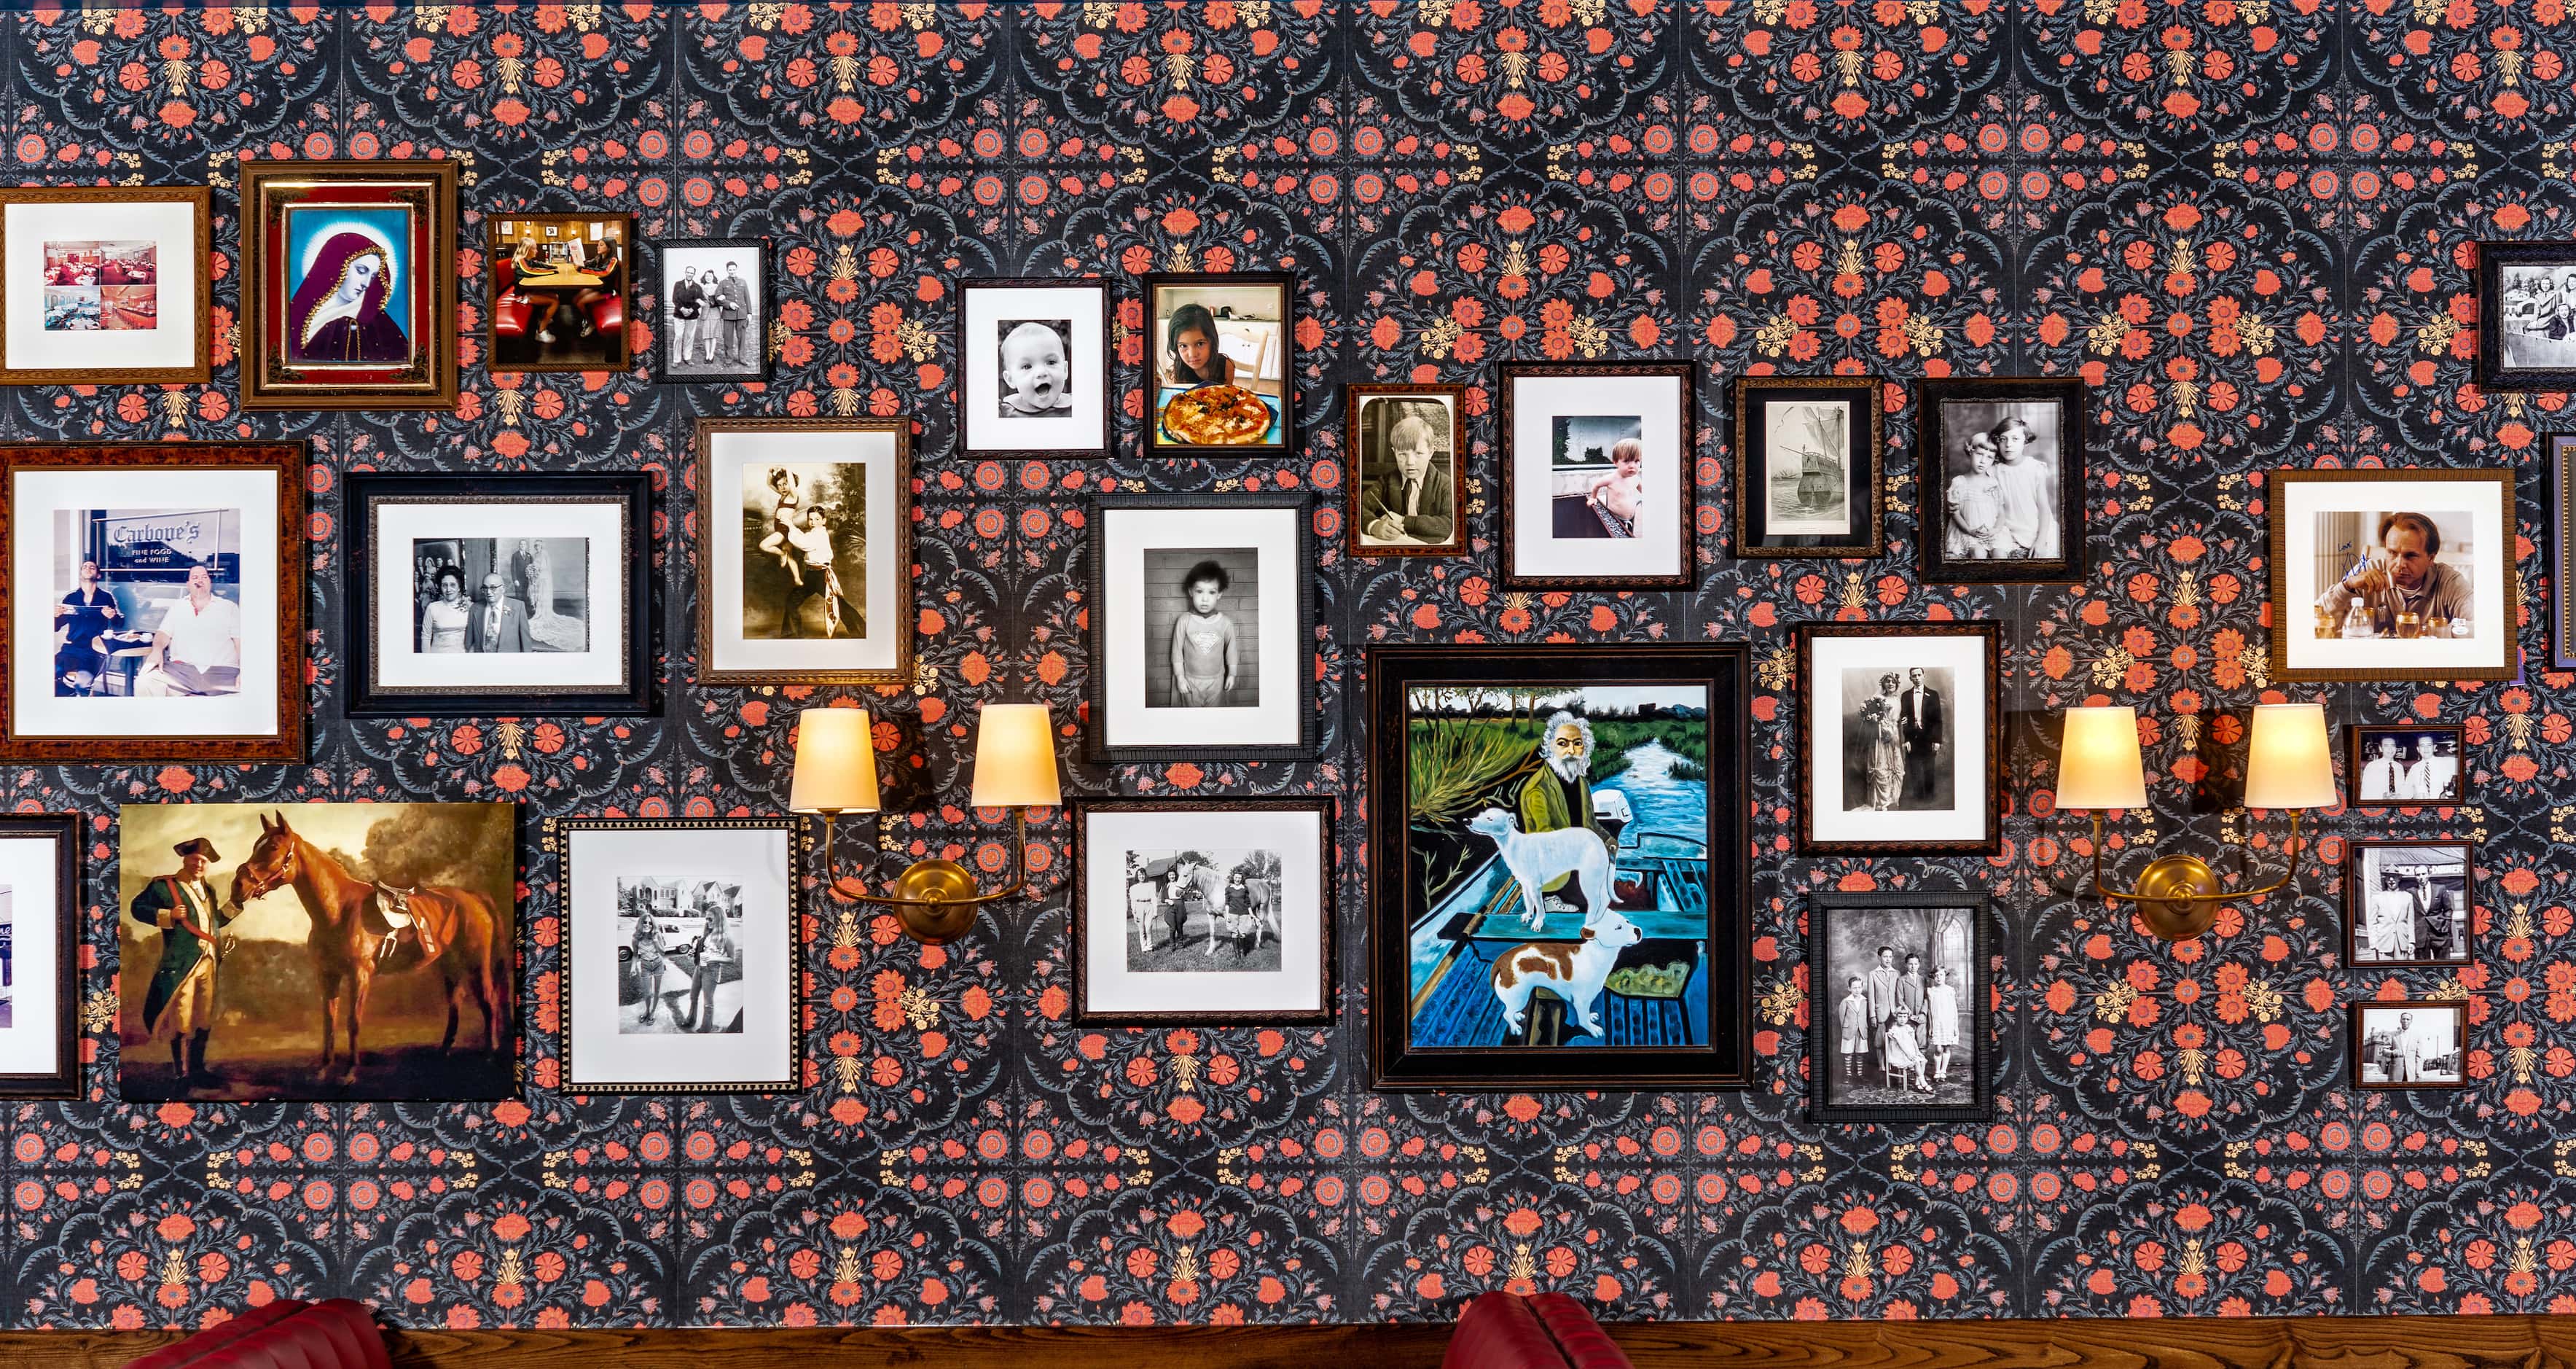 Owner Julian Barsotti plans to add to this wall when he has other framed photos or art to...